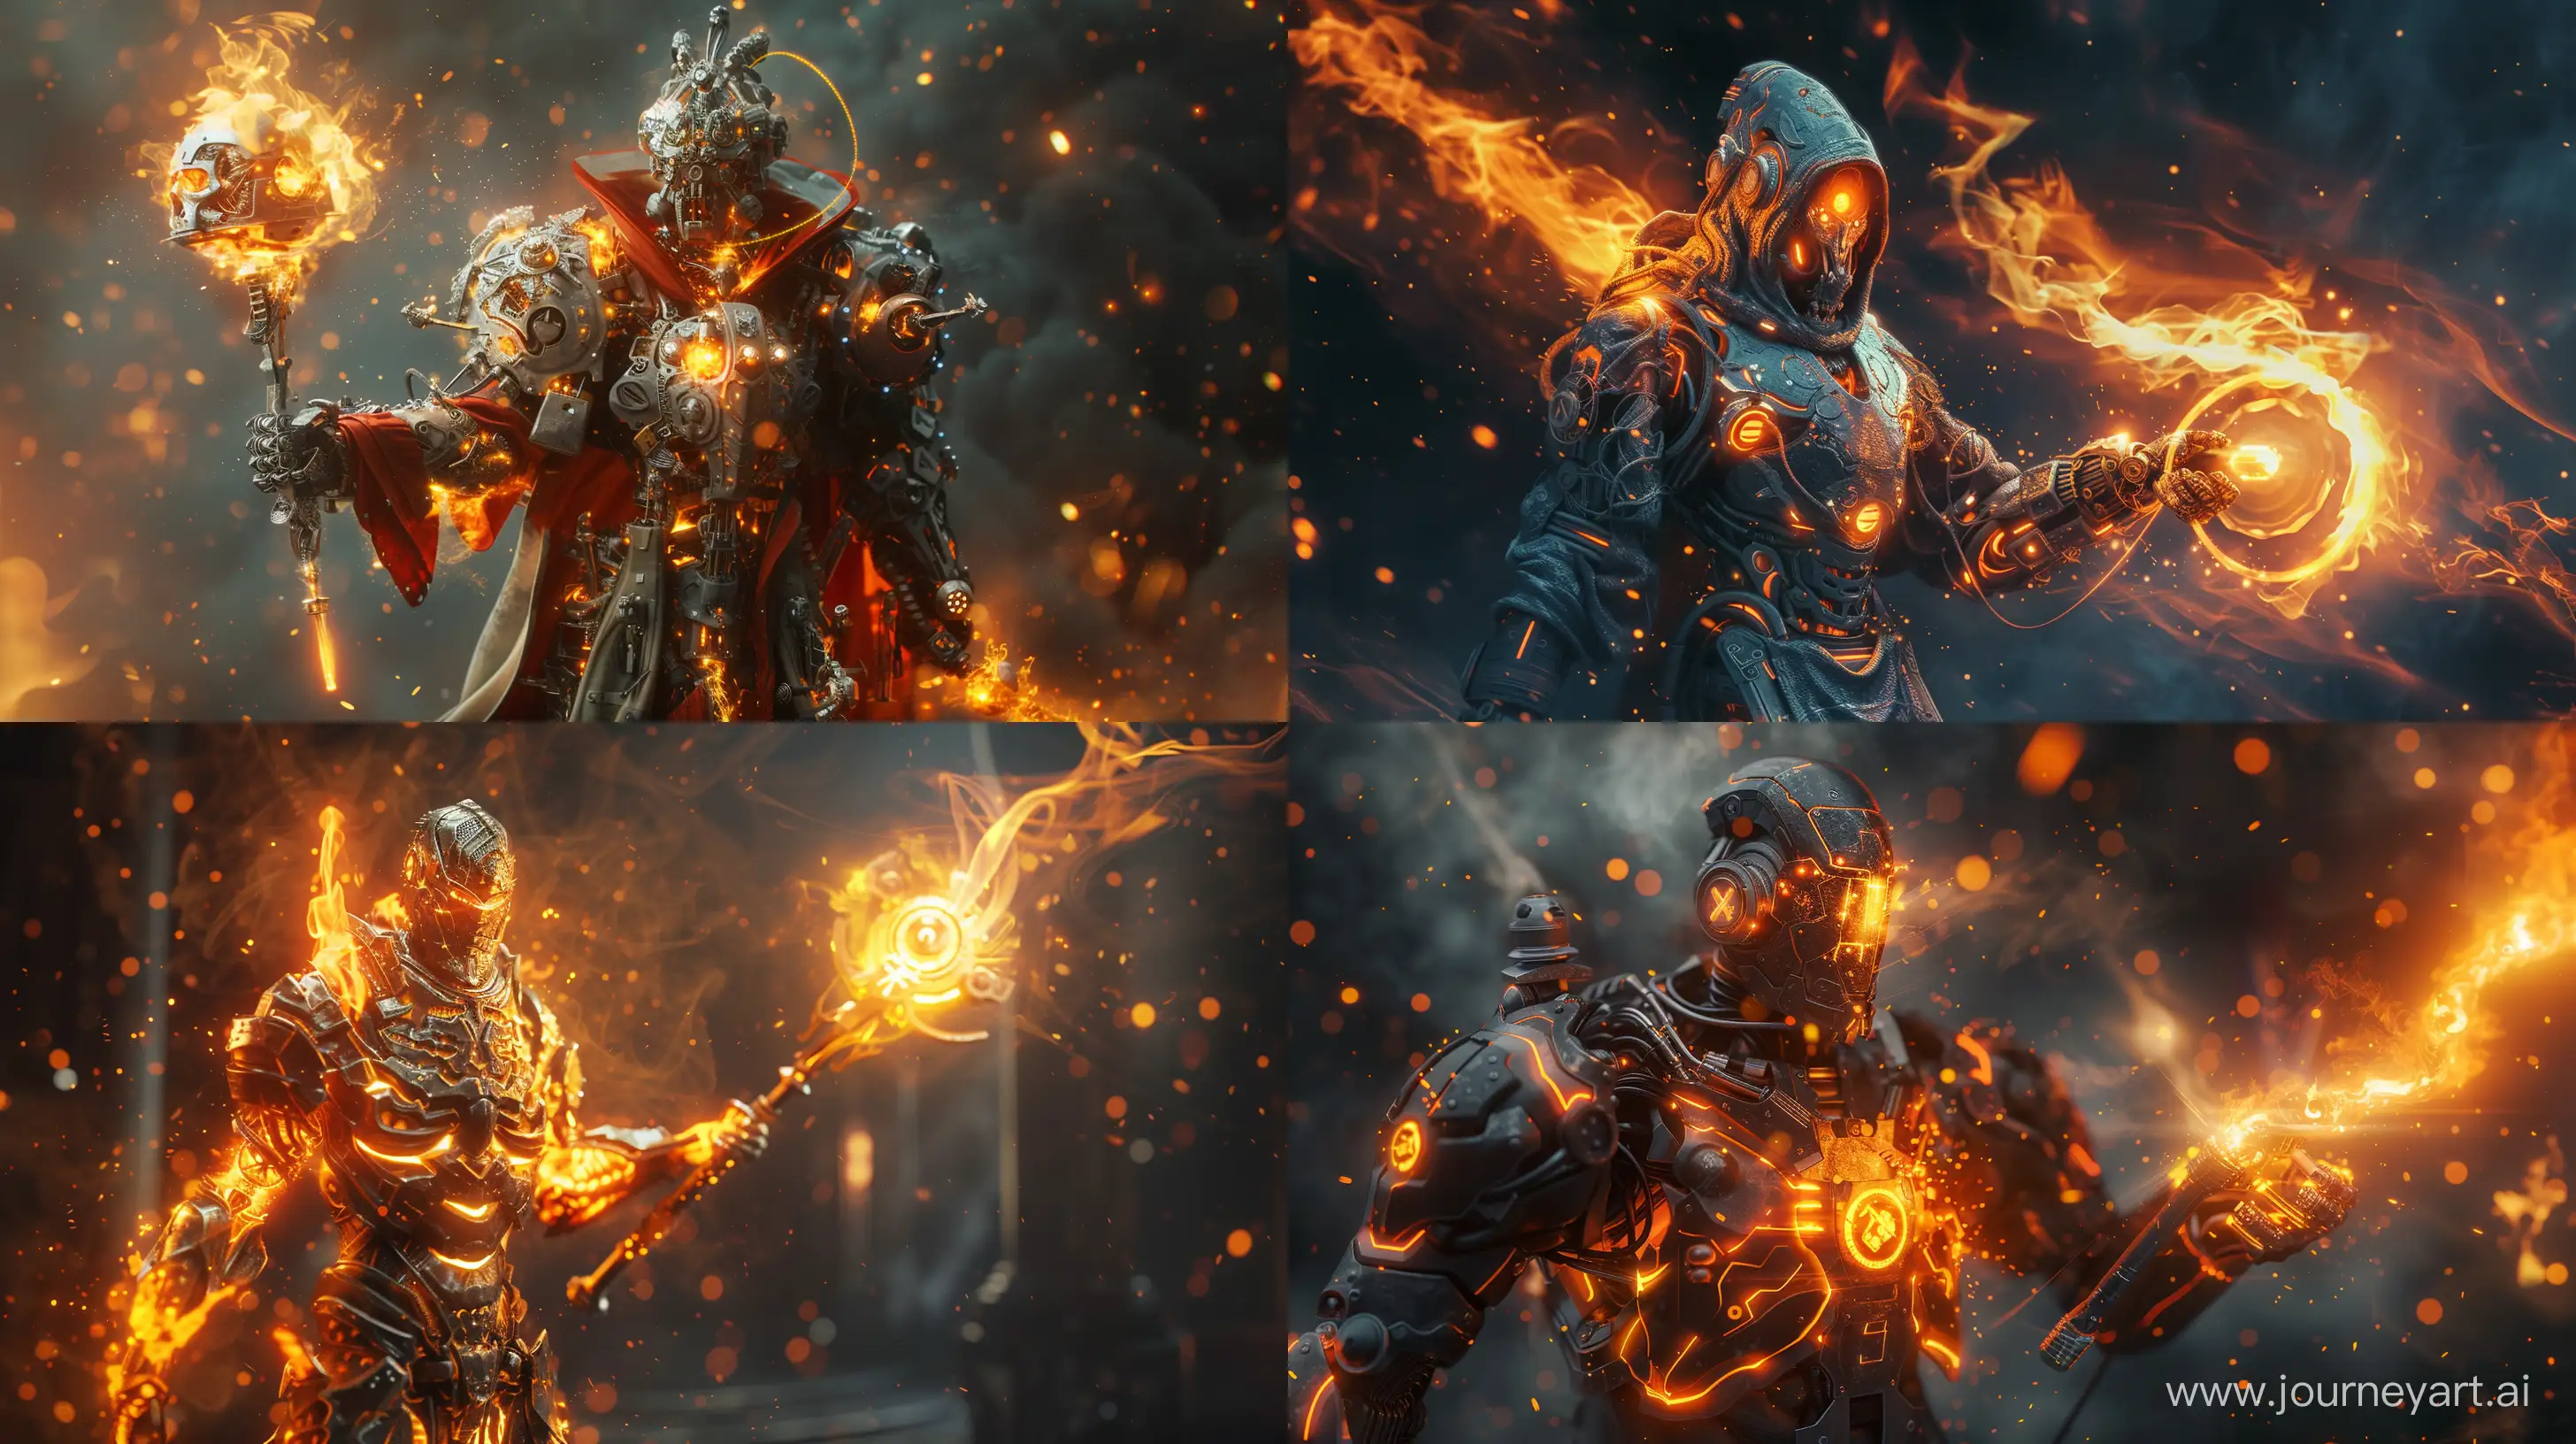 Fiery-Cyborg-Mage-Conjuring-Intricate-Machine-Wand-in-Cinematic-Flames